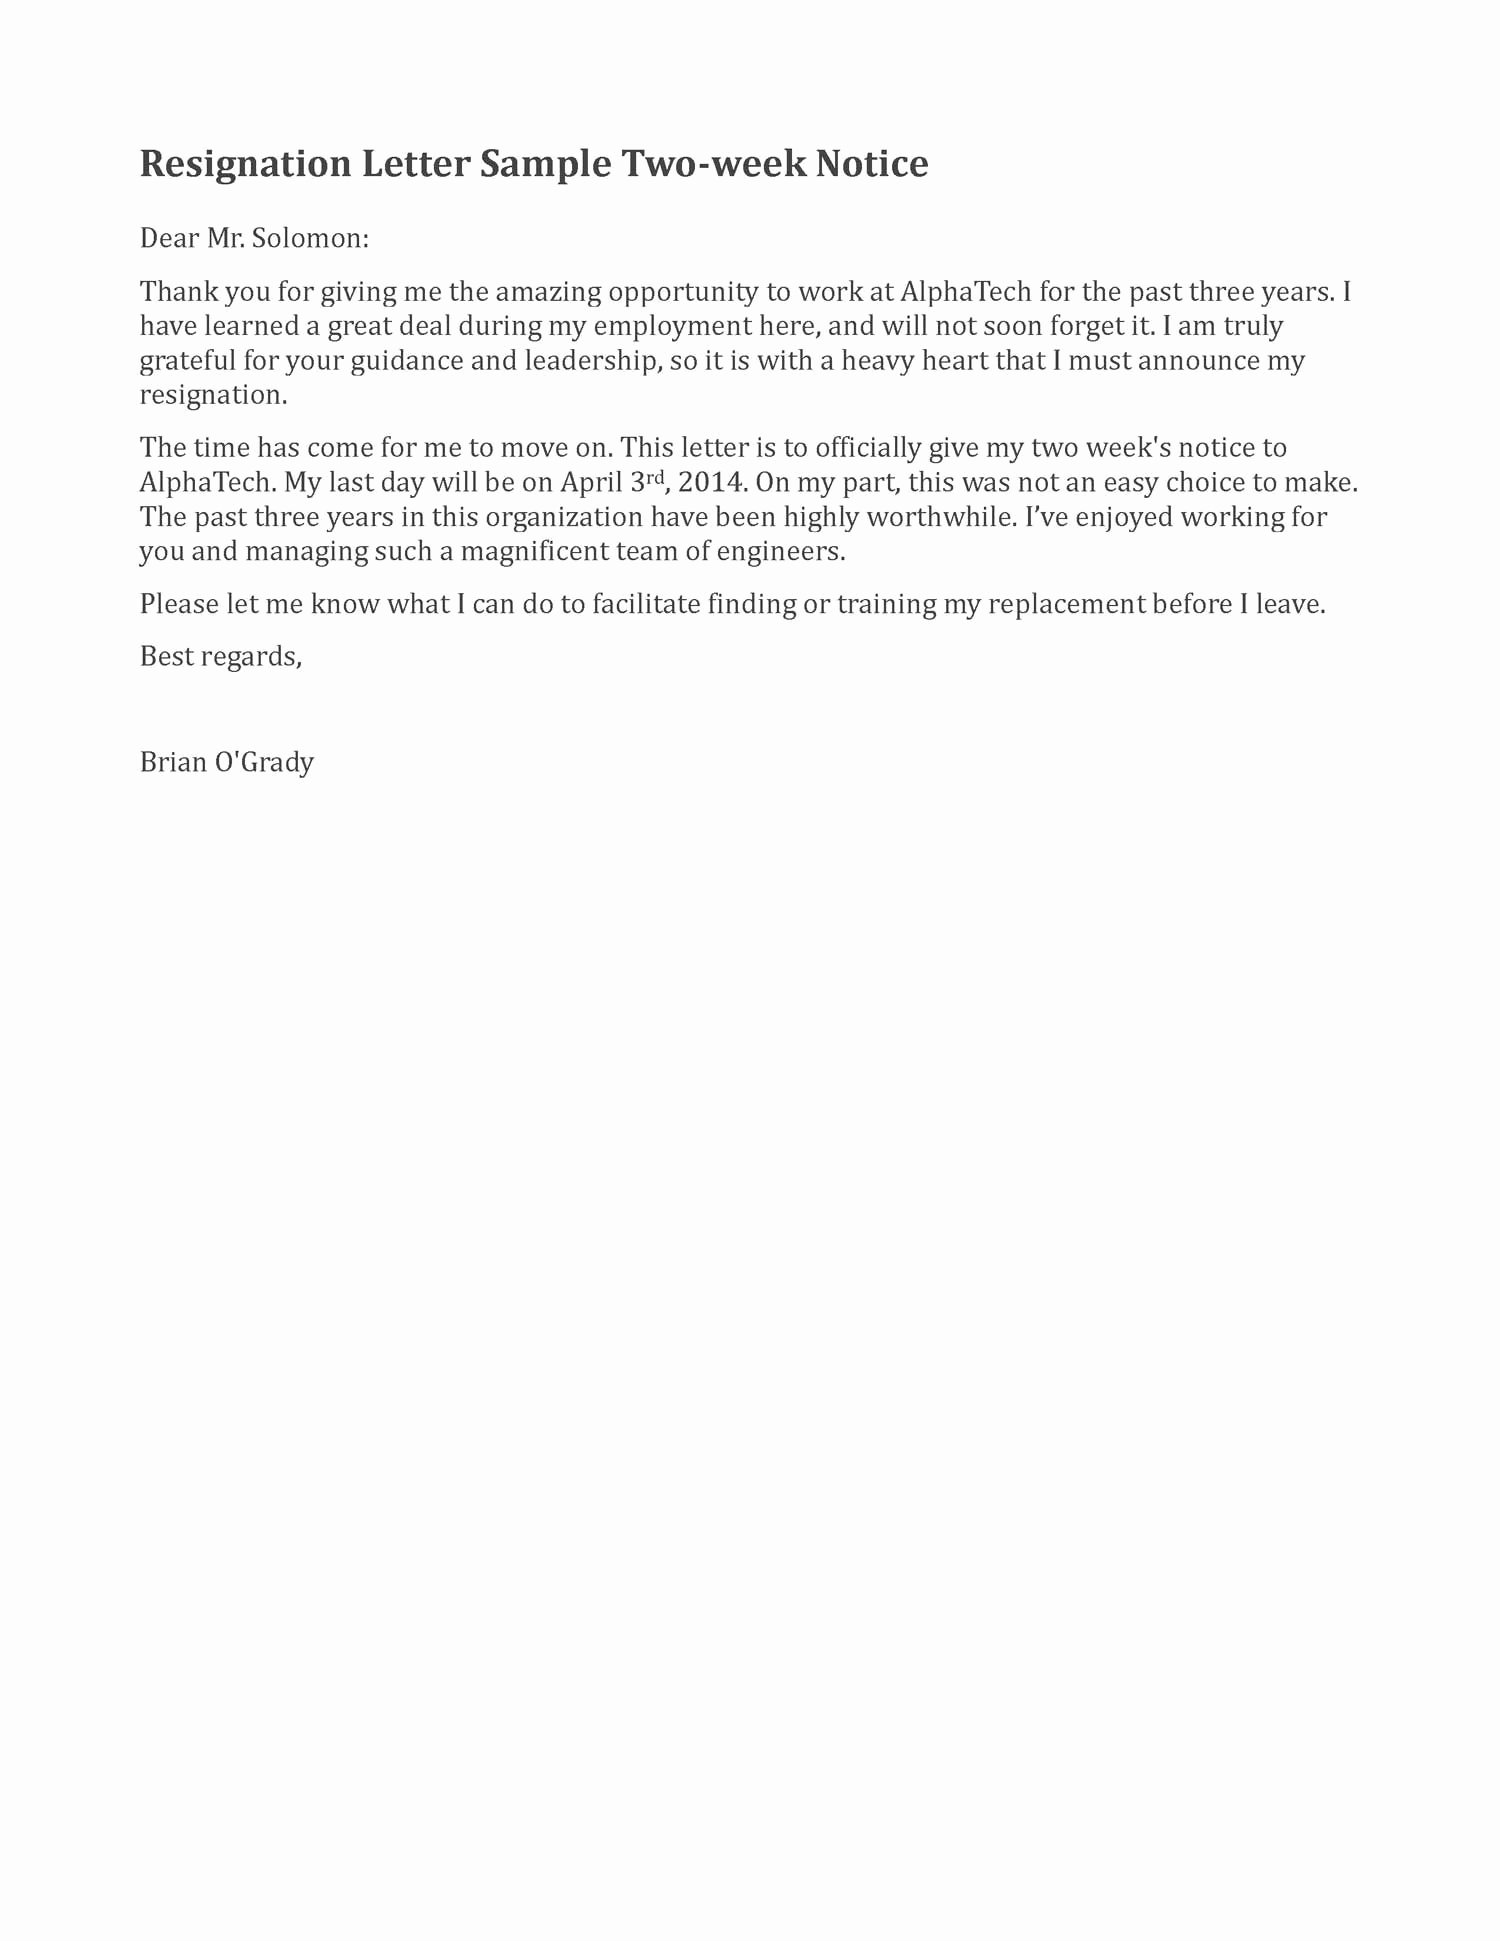 Two Week Resignation Letter Beautiful Resignation Letter Sample 2 Weeks Notice Google Search